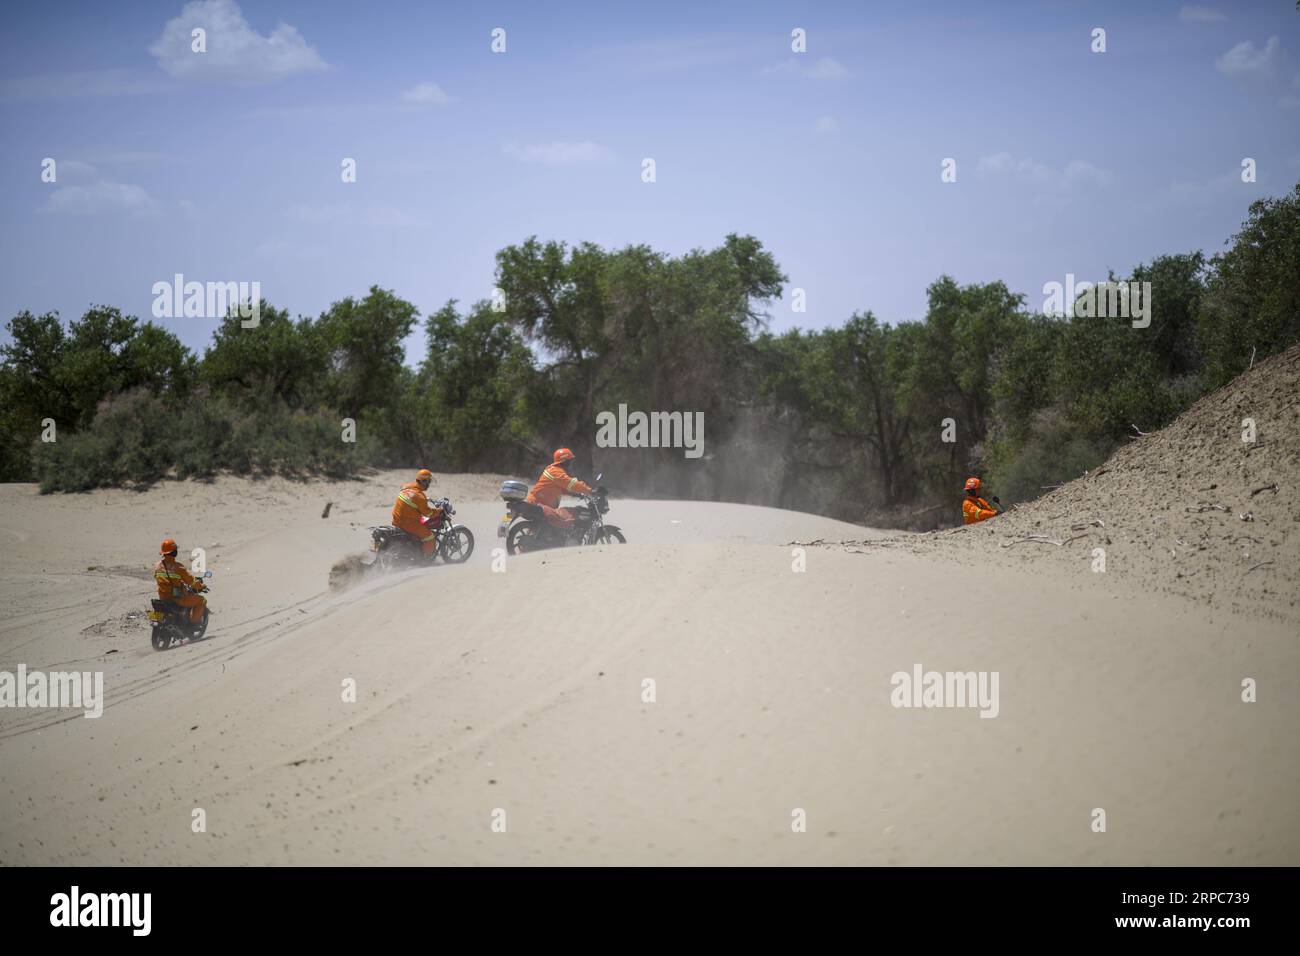 (190626) -- YULI, June 26, 2019 -- Firefighters ride motorcycles at Lop Nur national wetland park in Yuli County, northwest China s Xinjiang Uygur Autonomous Region, on June 19, 2019. Heatwaves sweep the Tarim Basin every summer, and the temperature reached over 45 degrees Celsius here in this June. Situated at the border of Tarim Basin,Yuli County is exposed to the threat of forest fires. In order to prevent this risk, a batch of selected firefighters have done their firefighting work for years. They shuttle in wide expanse of desert poplars to protect the area. ) CHINA-XINJIANG-YULI-FOREST G Stock Photo